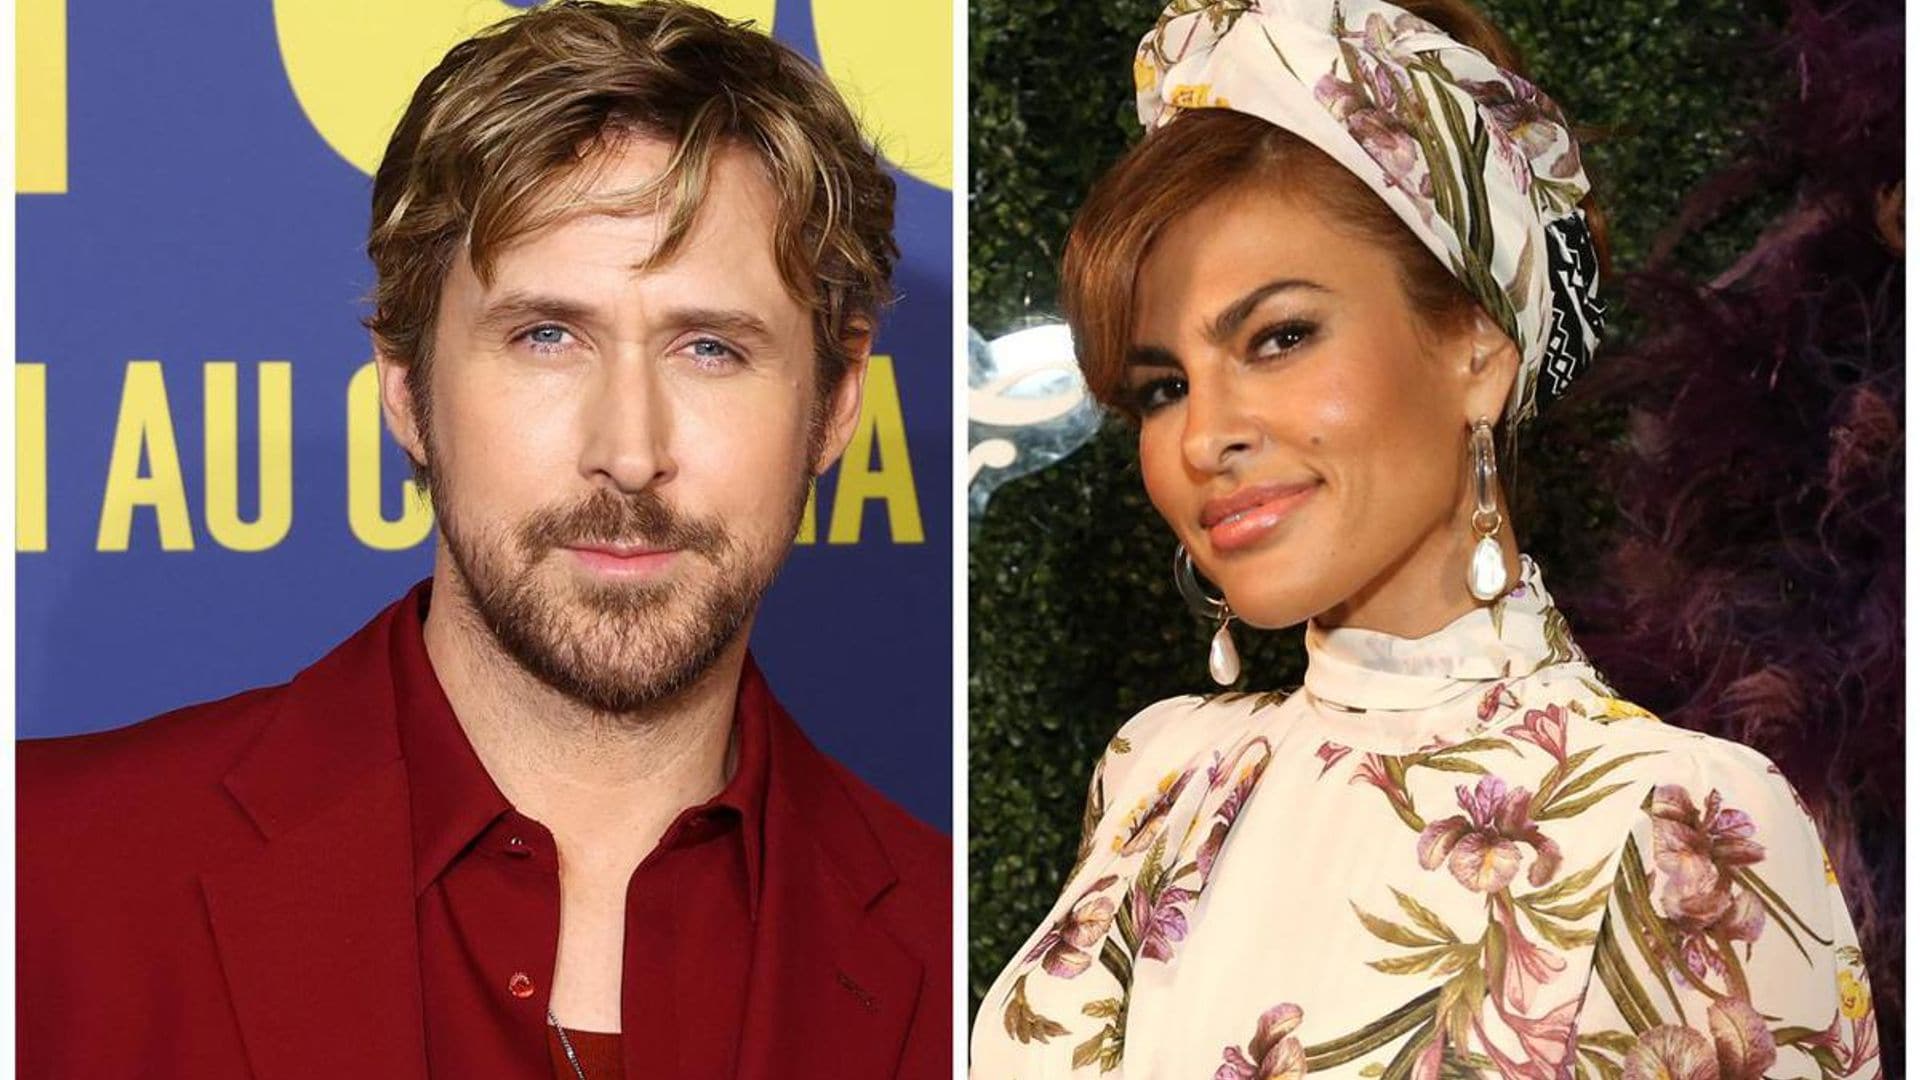 Ryan Gosling supports Eva Mendes’ book release while promoting his new film